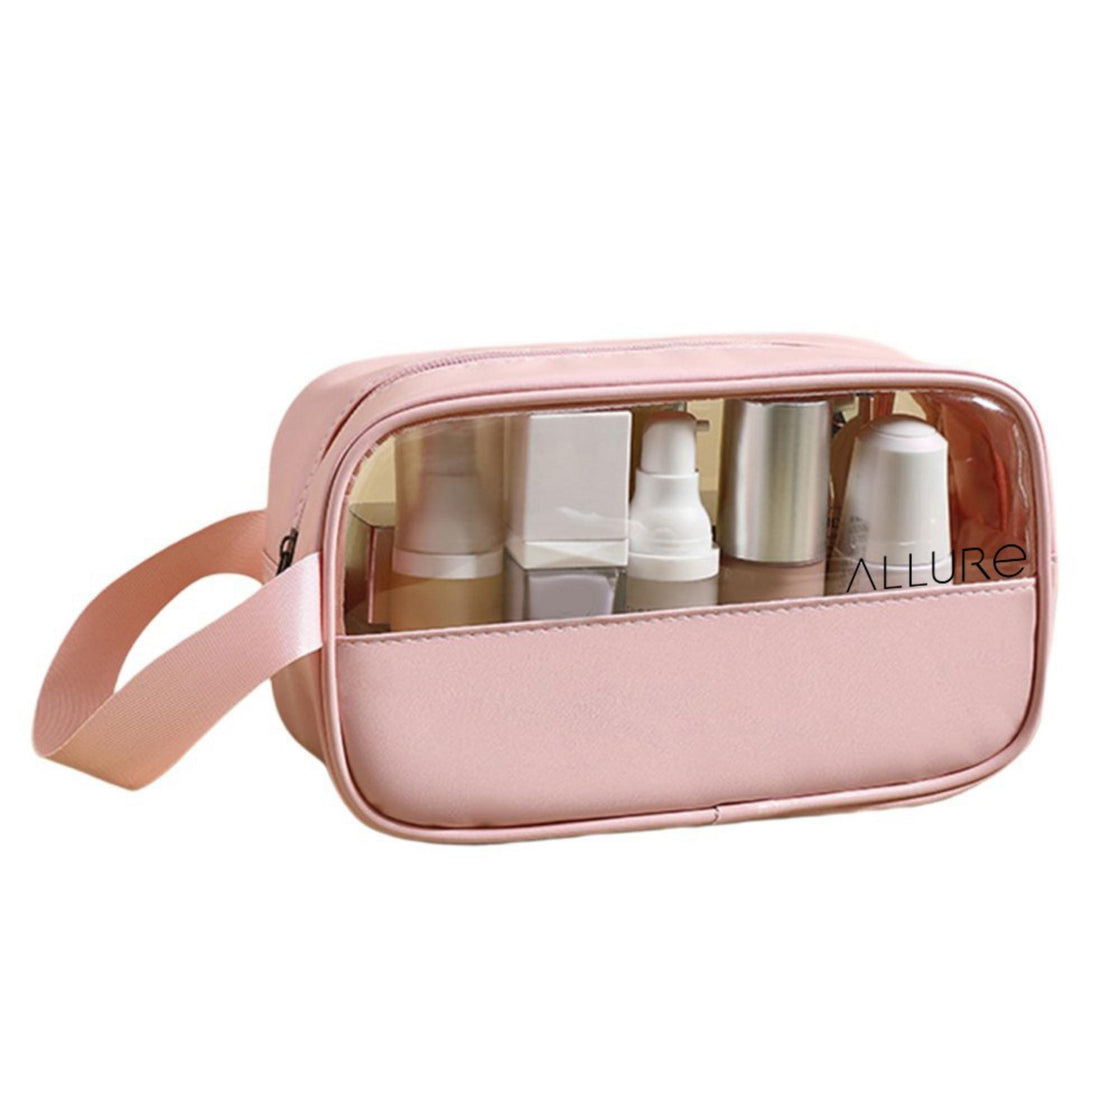 Allure Toiletry Bag Small Pink